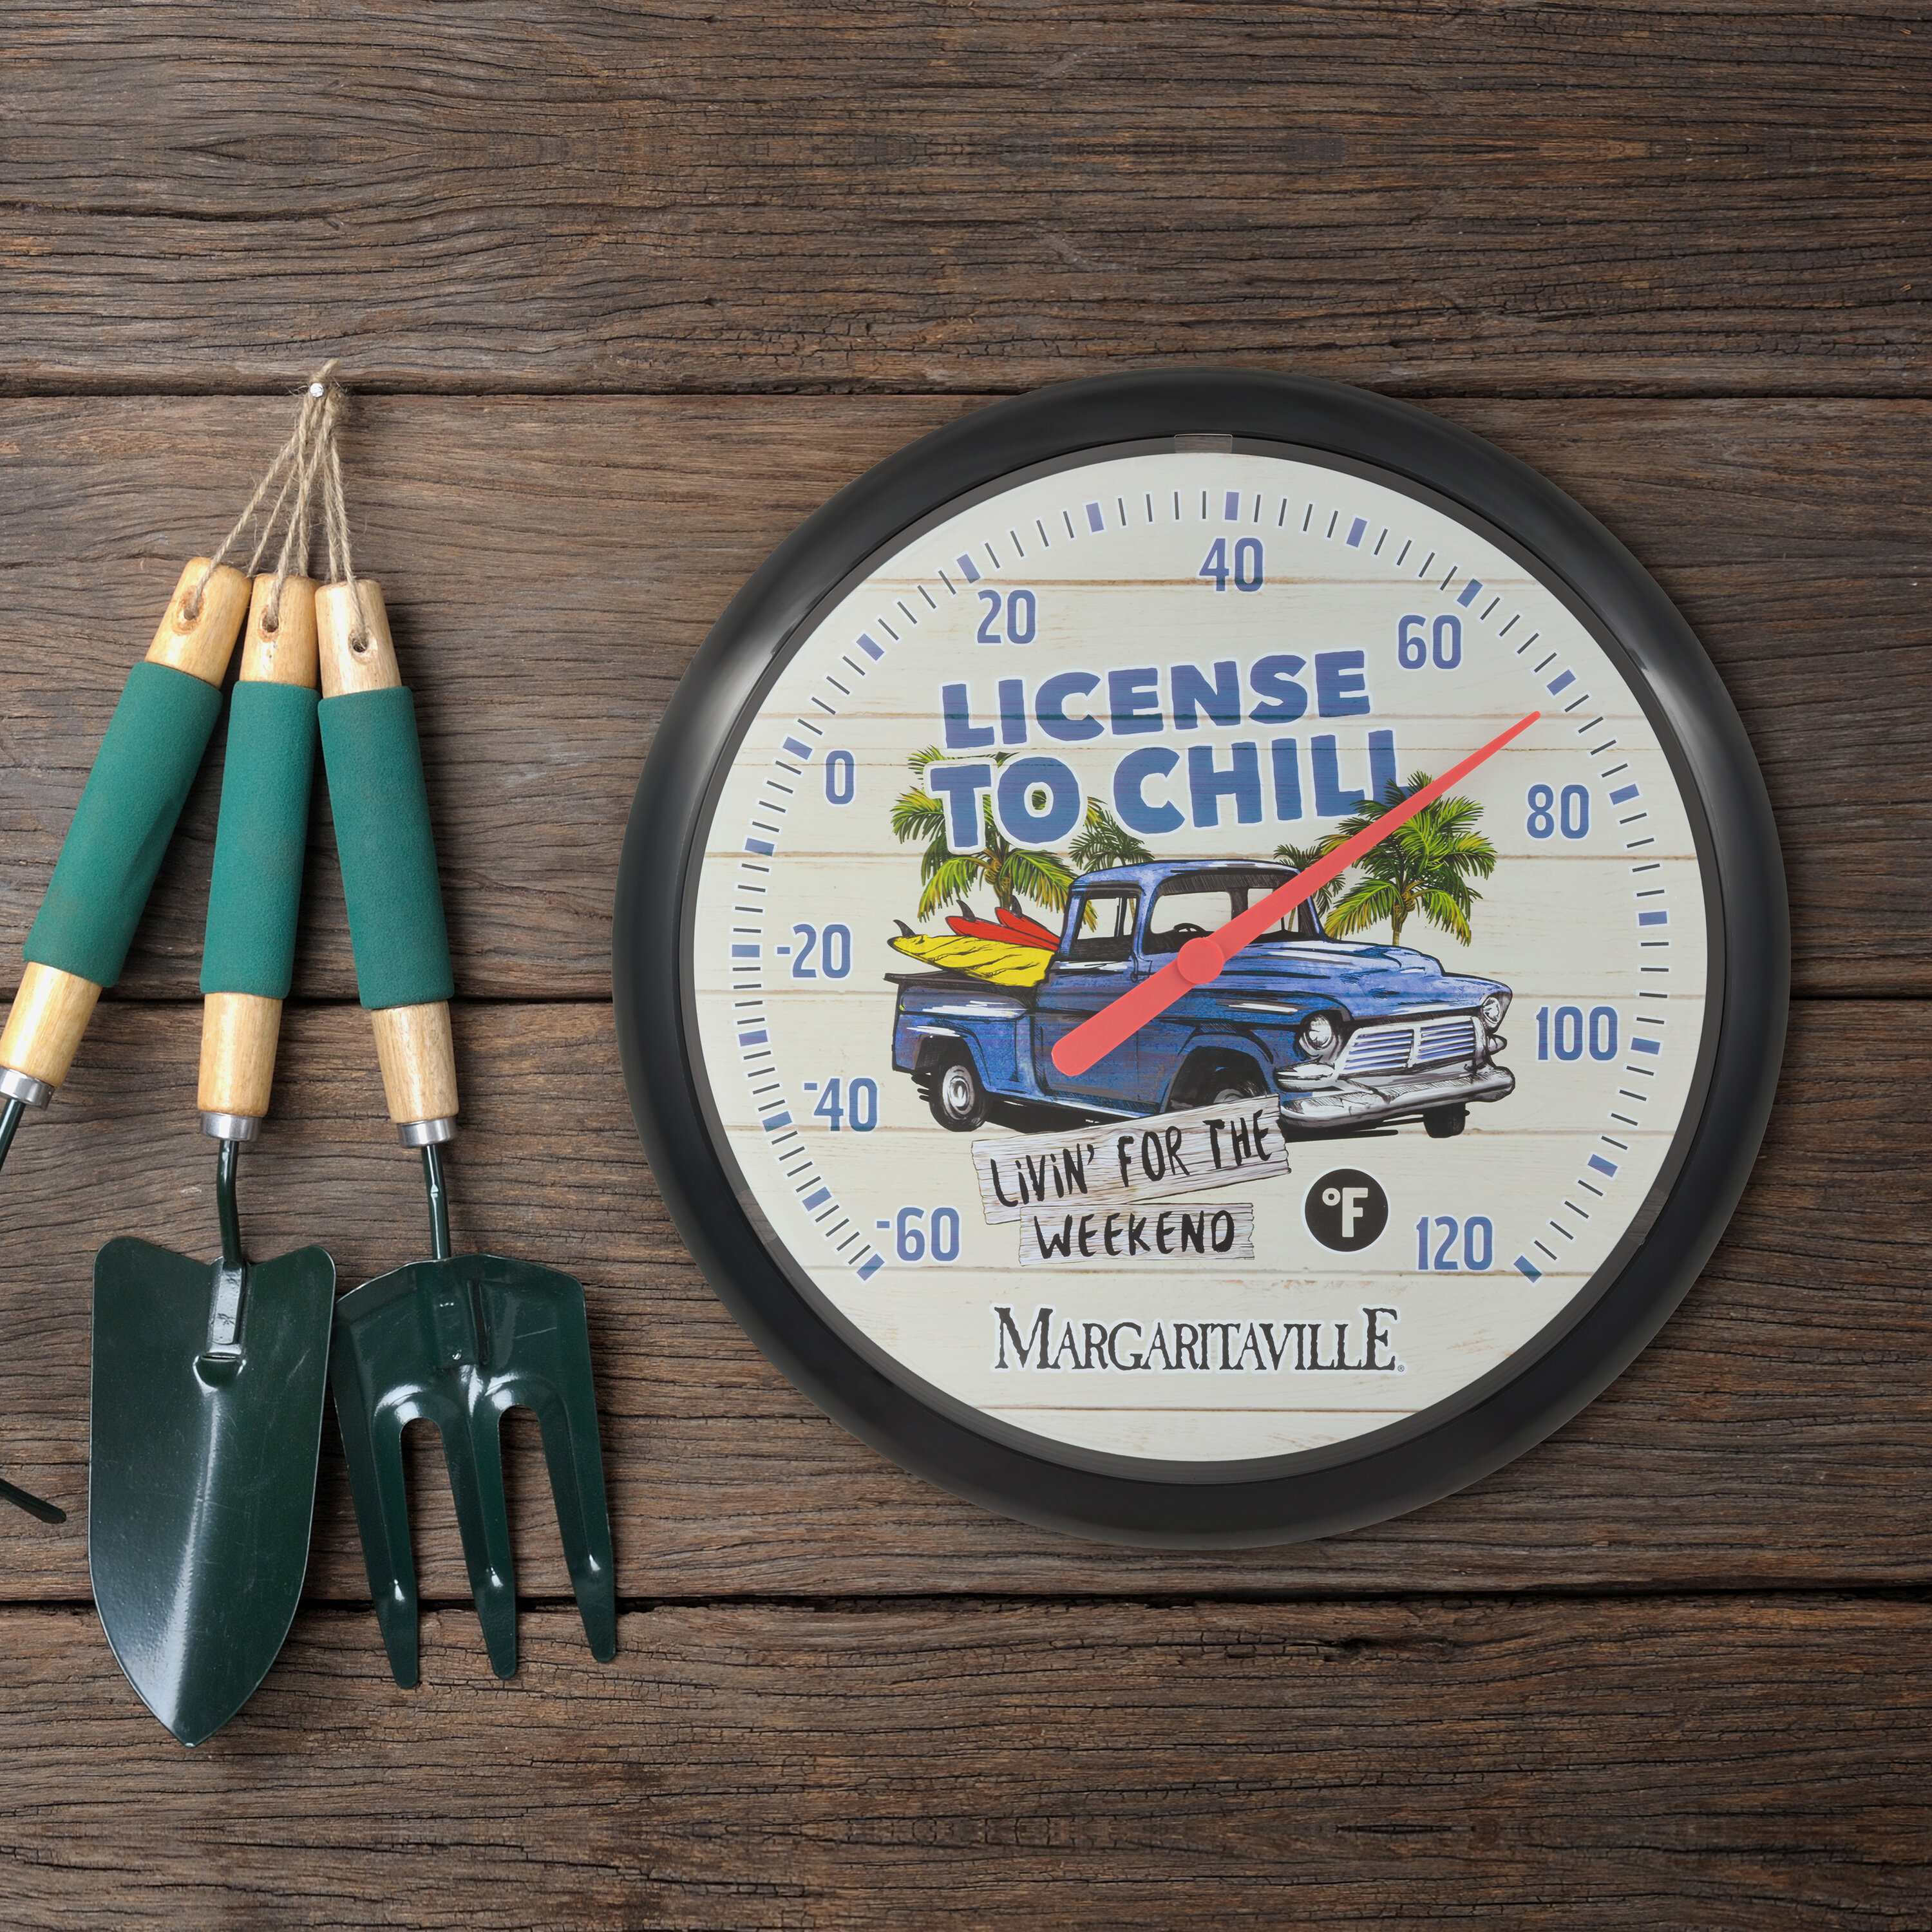 Retro Hotrod Metal Wall Mount Thermometer Vintage Style Hanging